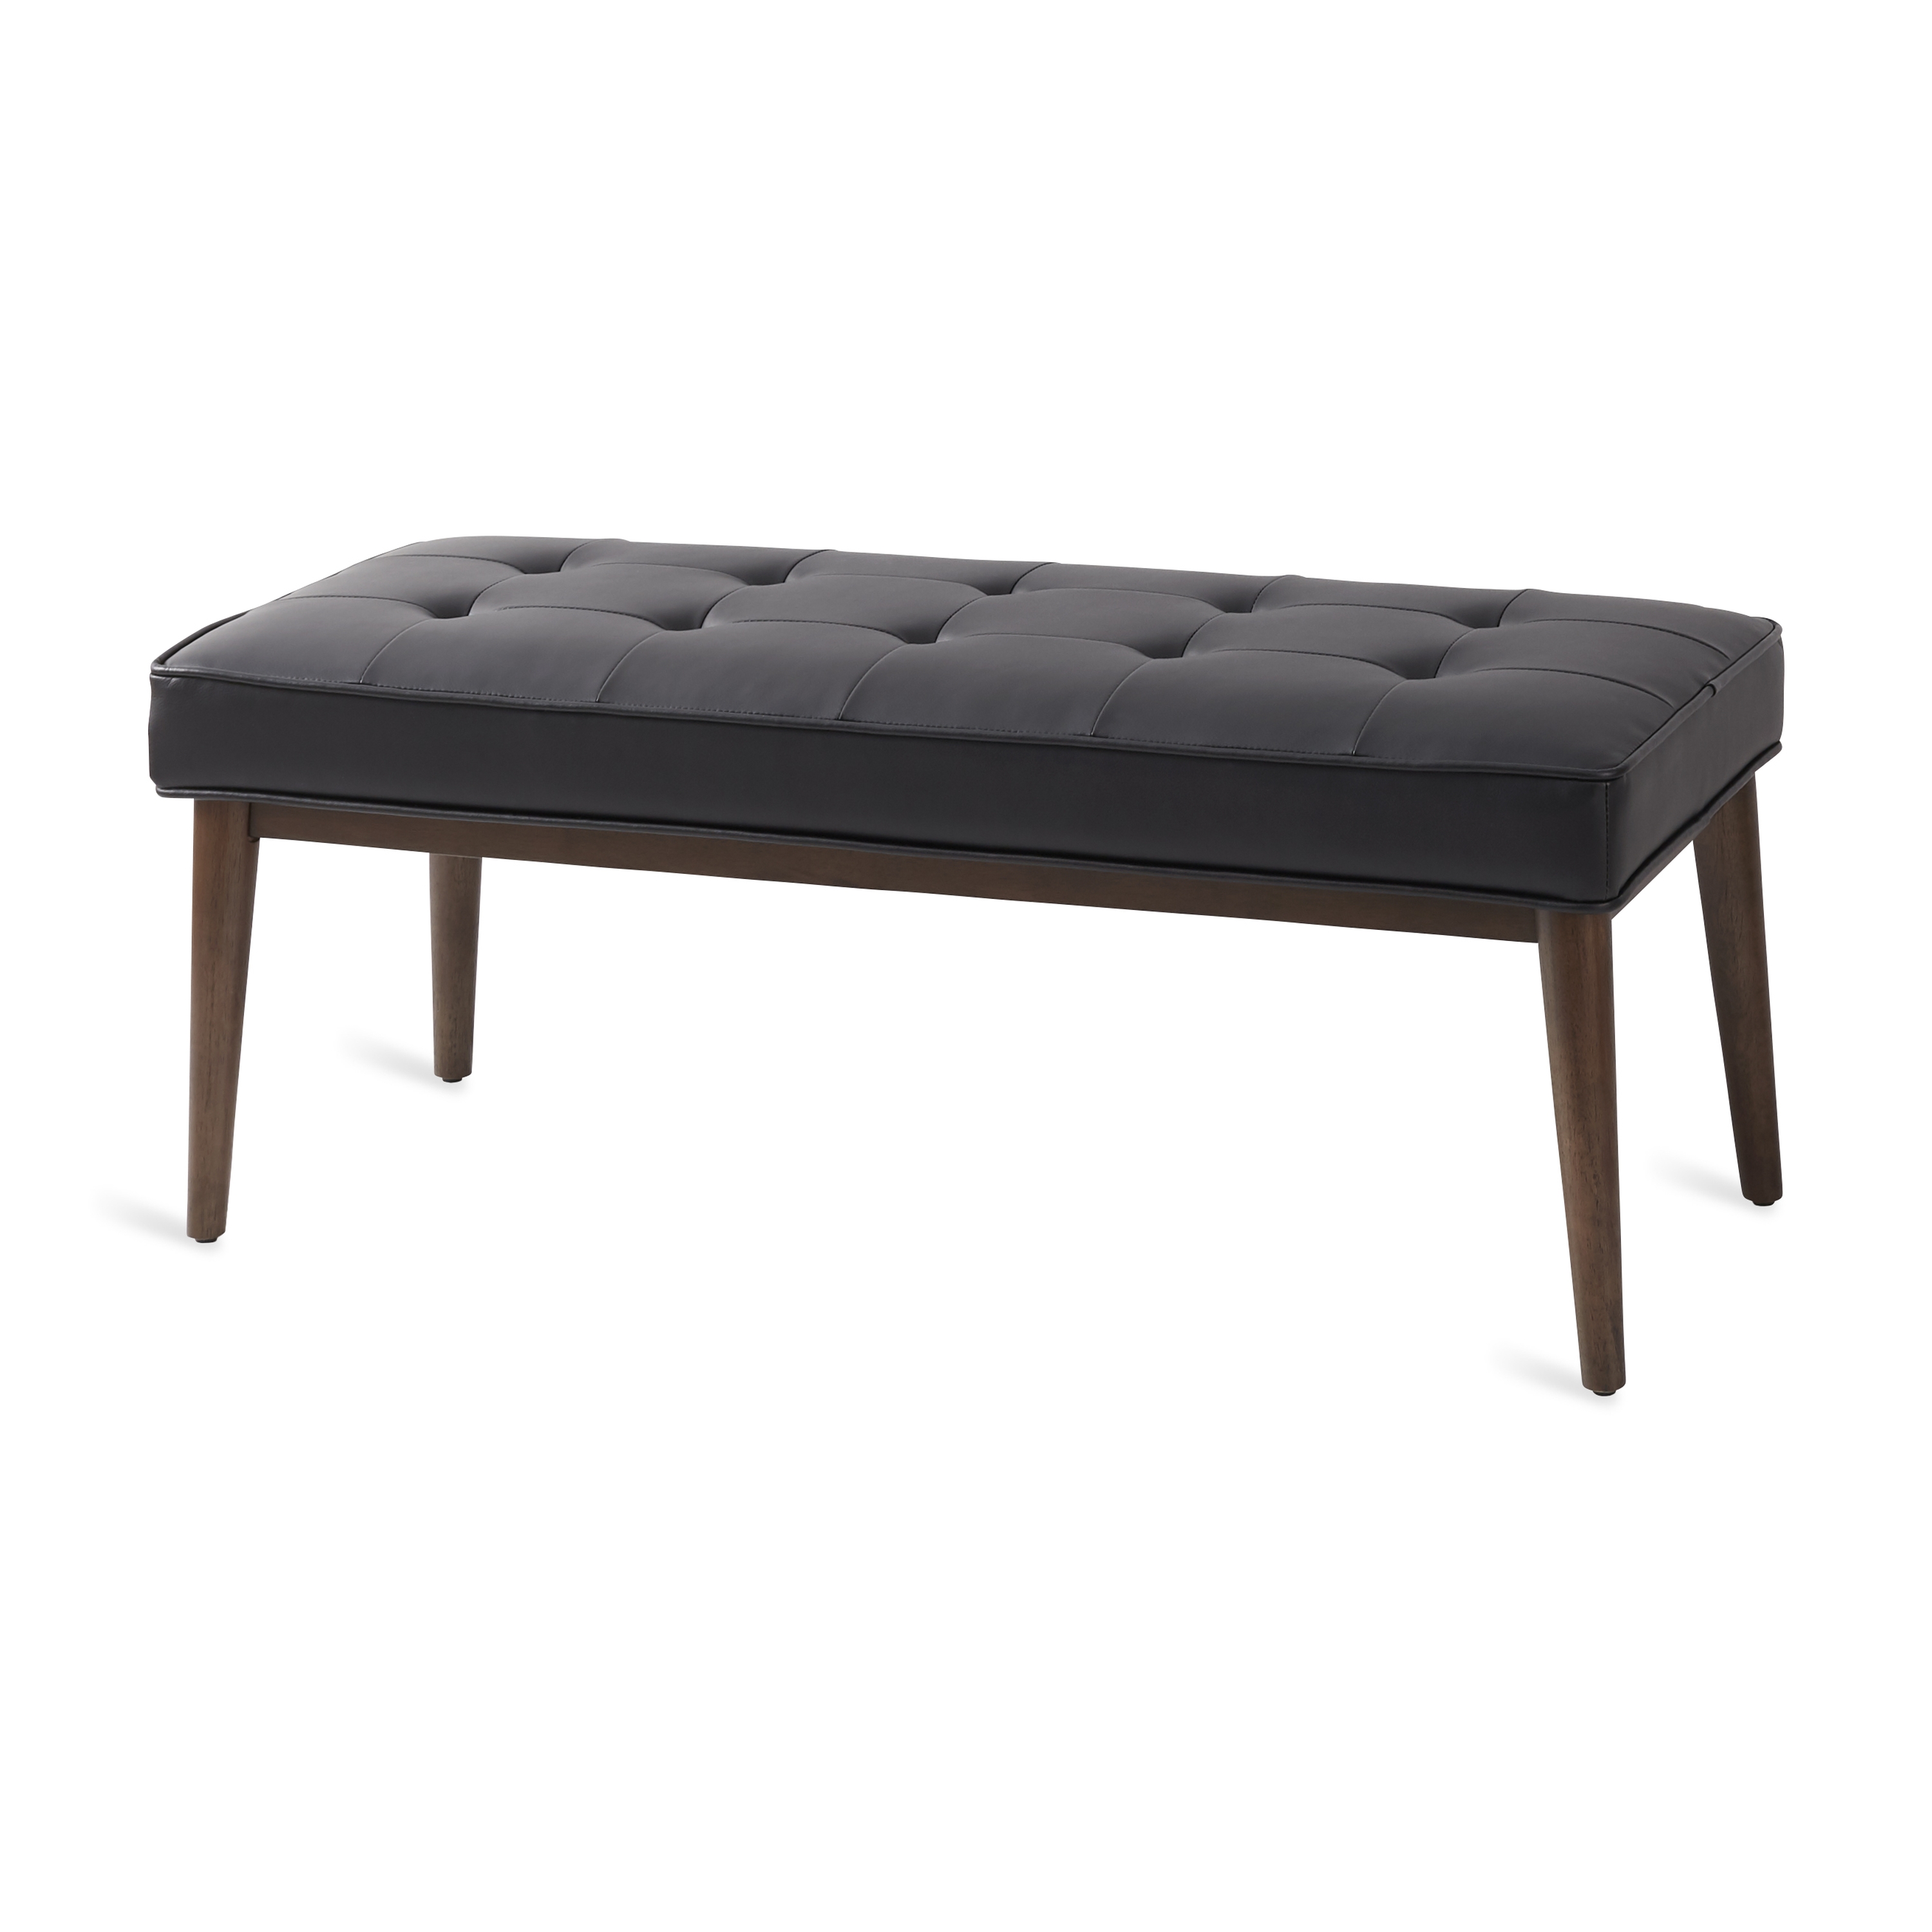 Better Homes & Gardens Colton Upholstered Bench, Black Faux Leather - image 2 of 4